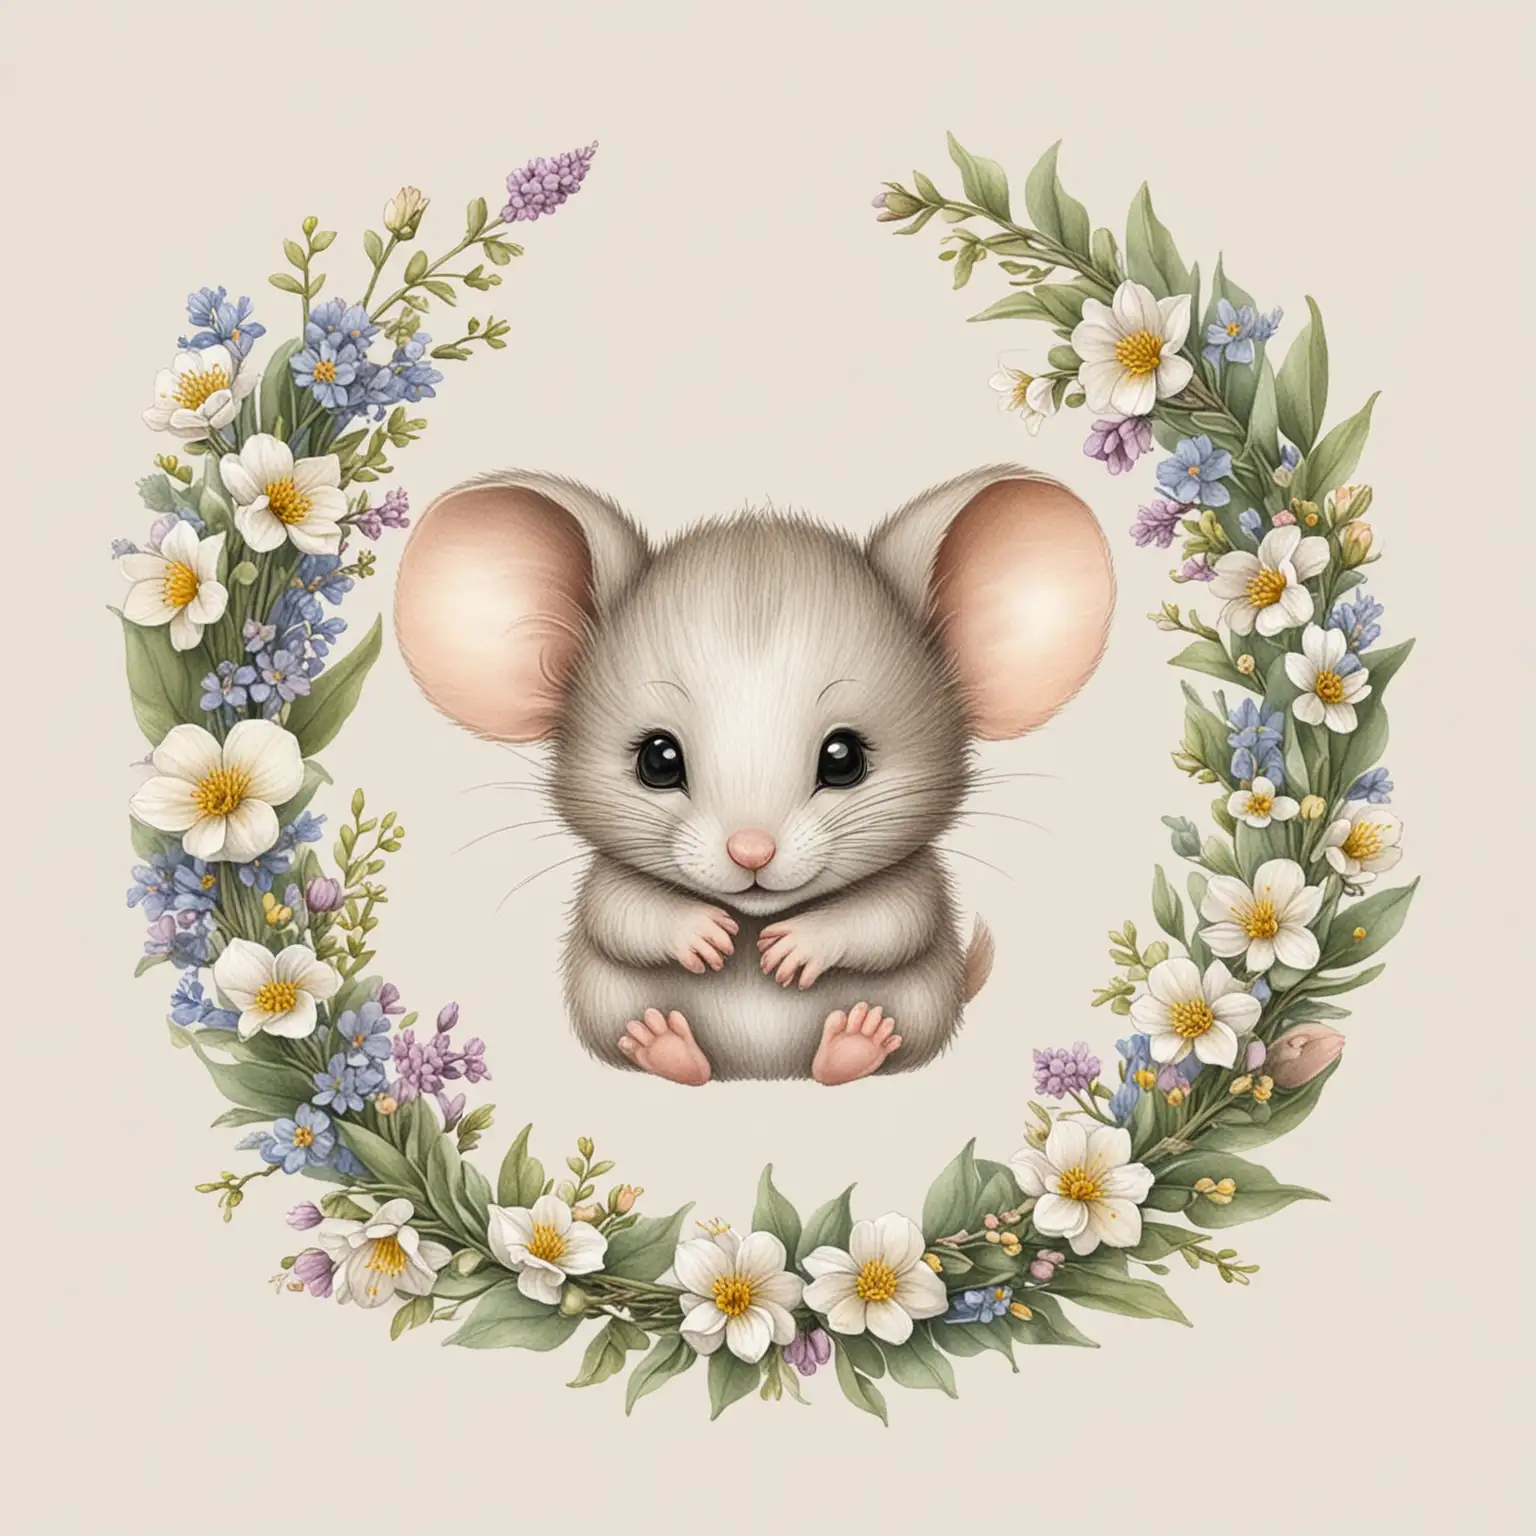 Cute pencil drawing of a garland with baby mouse holding spring flowers, neutral, isolated on a white background, suitable for clip art